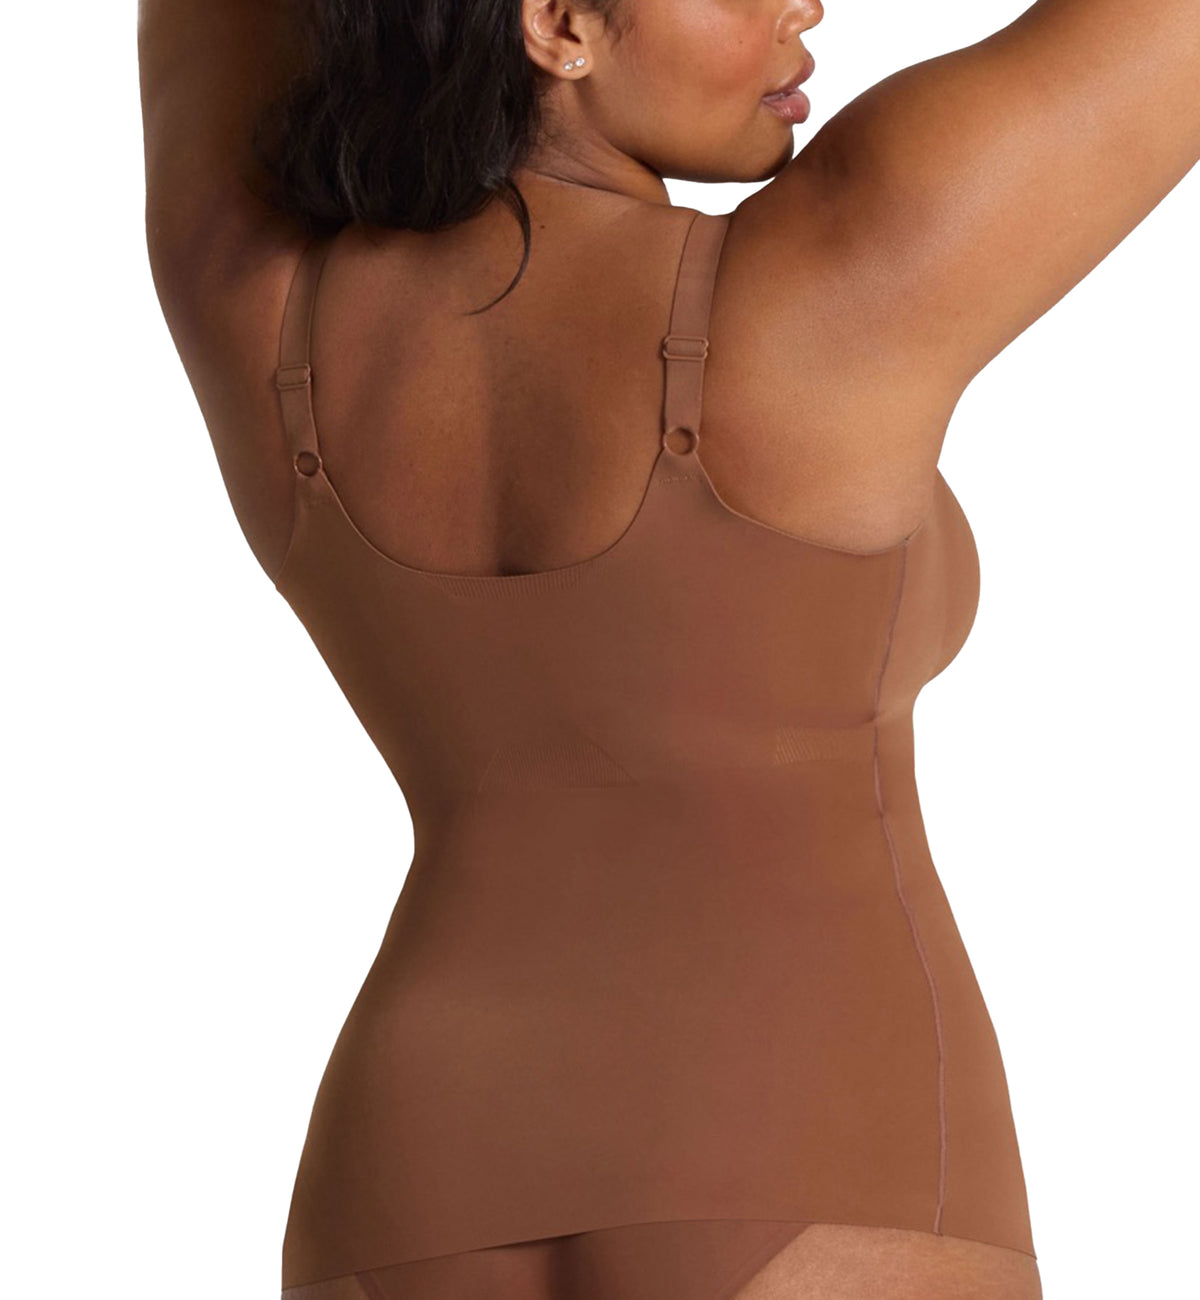 Evelyn &amp; Bobbie Structured Scoop Bra Tank (1811),Small,Clay - Clay,Small